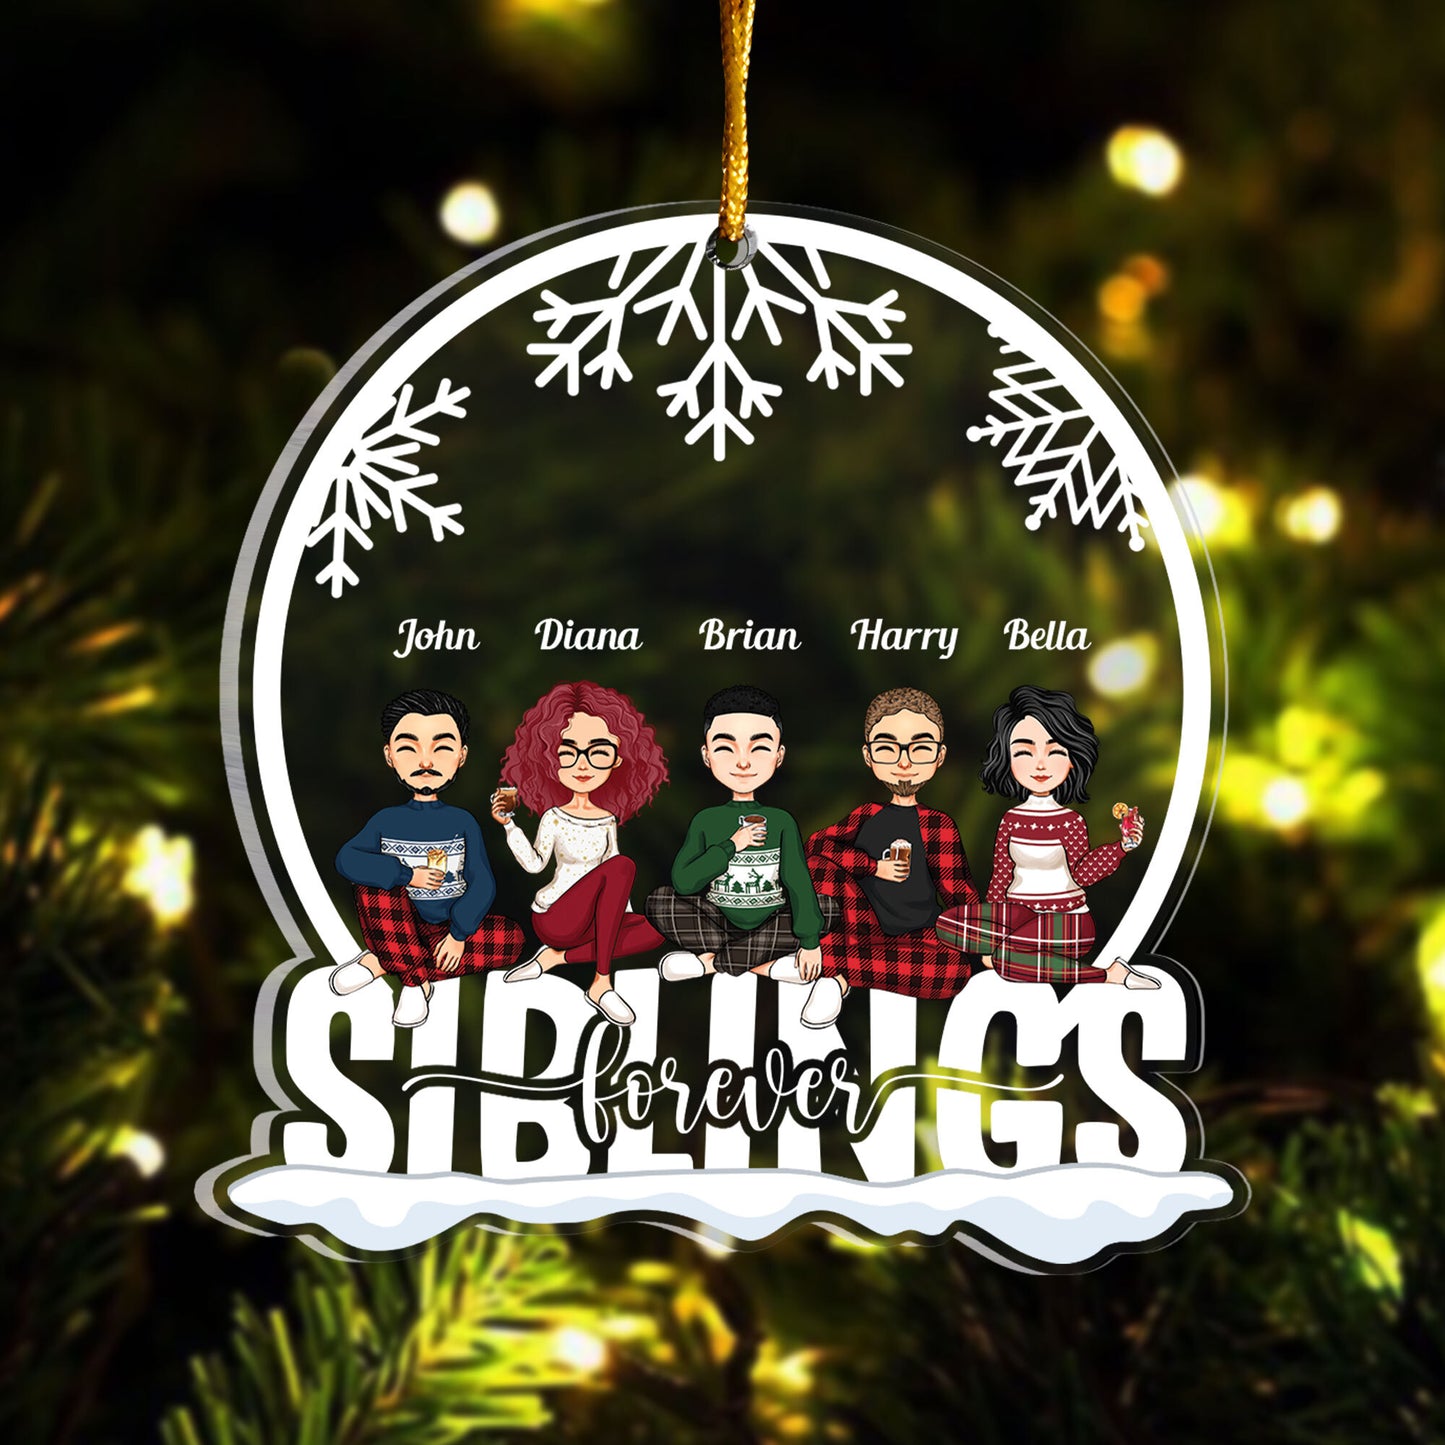 Siblings Forever - Personalized Custom Shaped Acrylic Ornament - Christmas Gift For Family, Dad, Mom, Sisters, Brothers